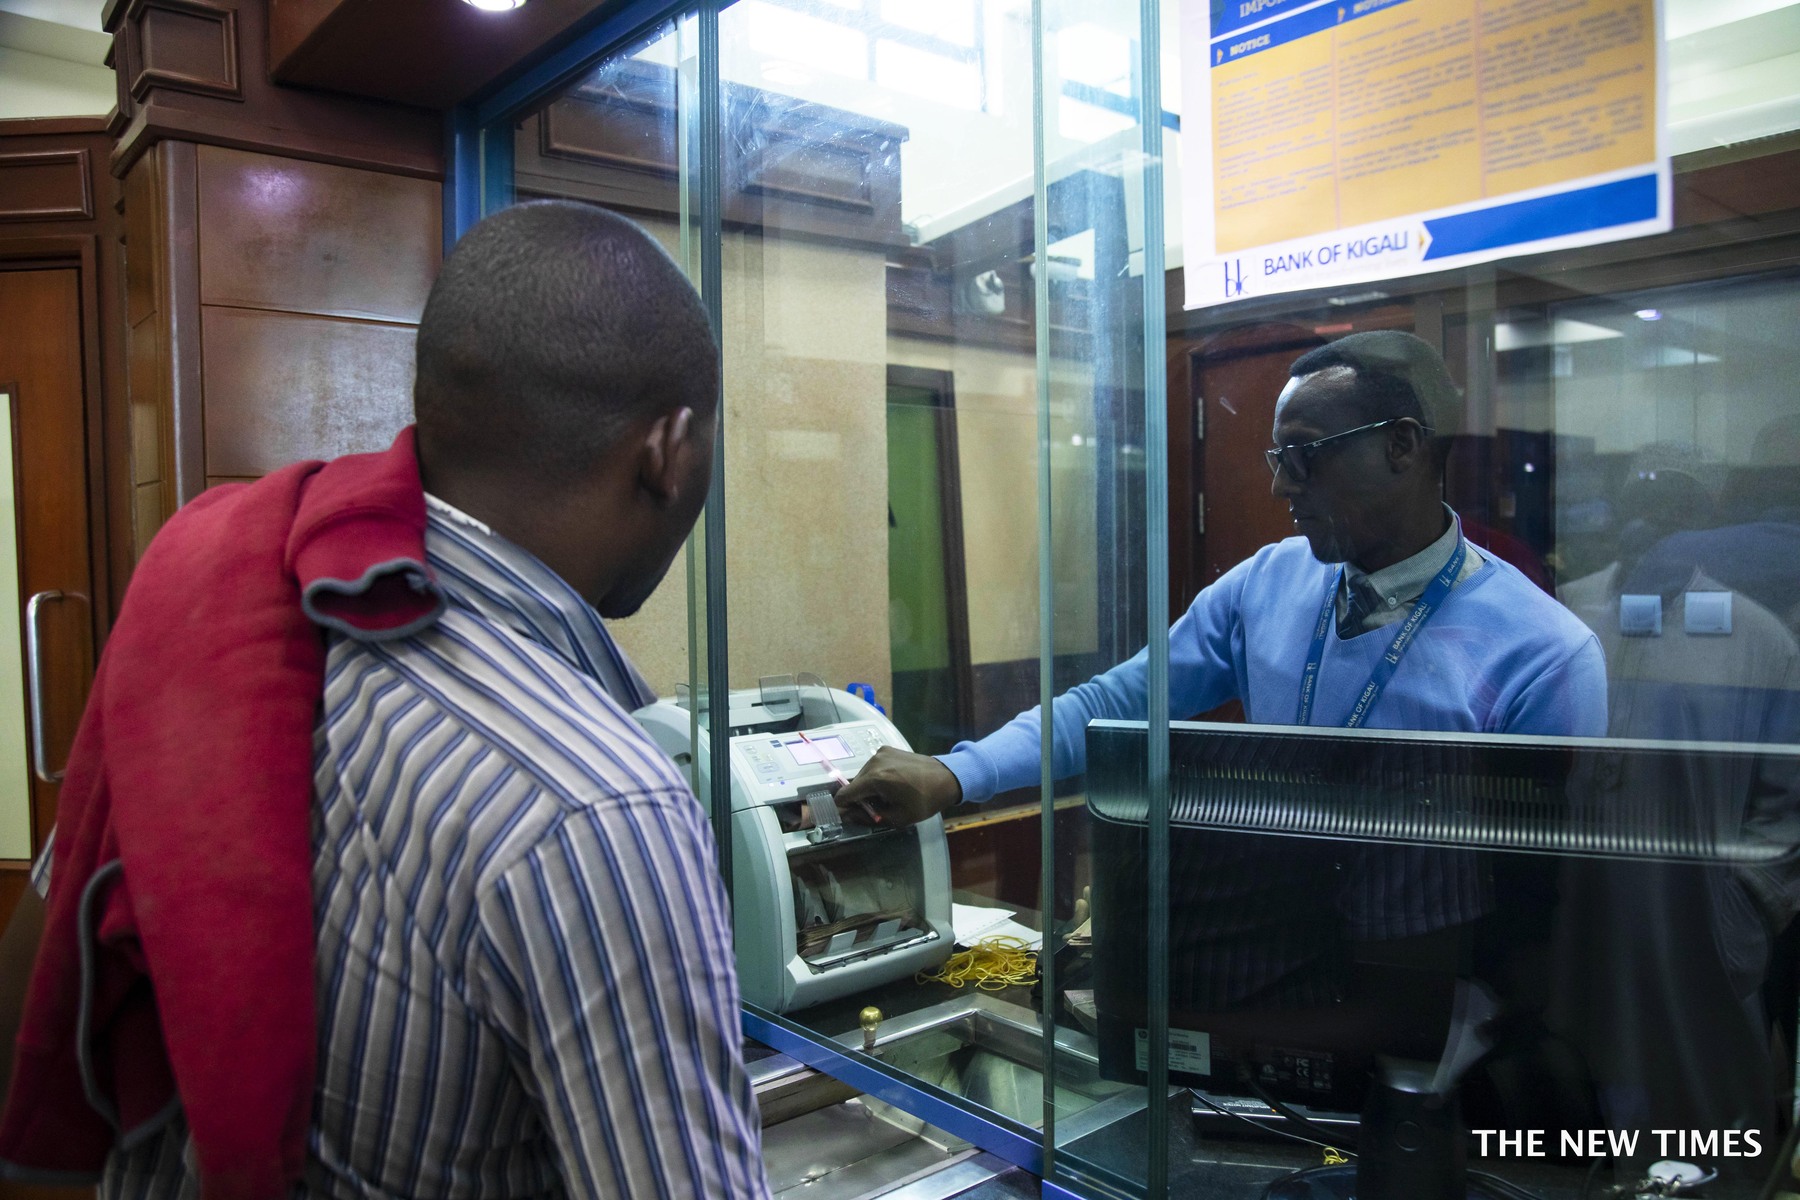 A teller serves a customer at Bank of Kigali headquarter in Kigali.BK Group Plc reported an after tax profit of Rwf15.6 billion in the first quarter of 2022, a 40 percent increase compared to the same period last year. 